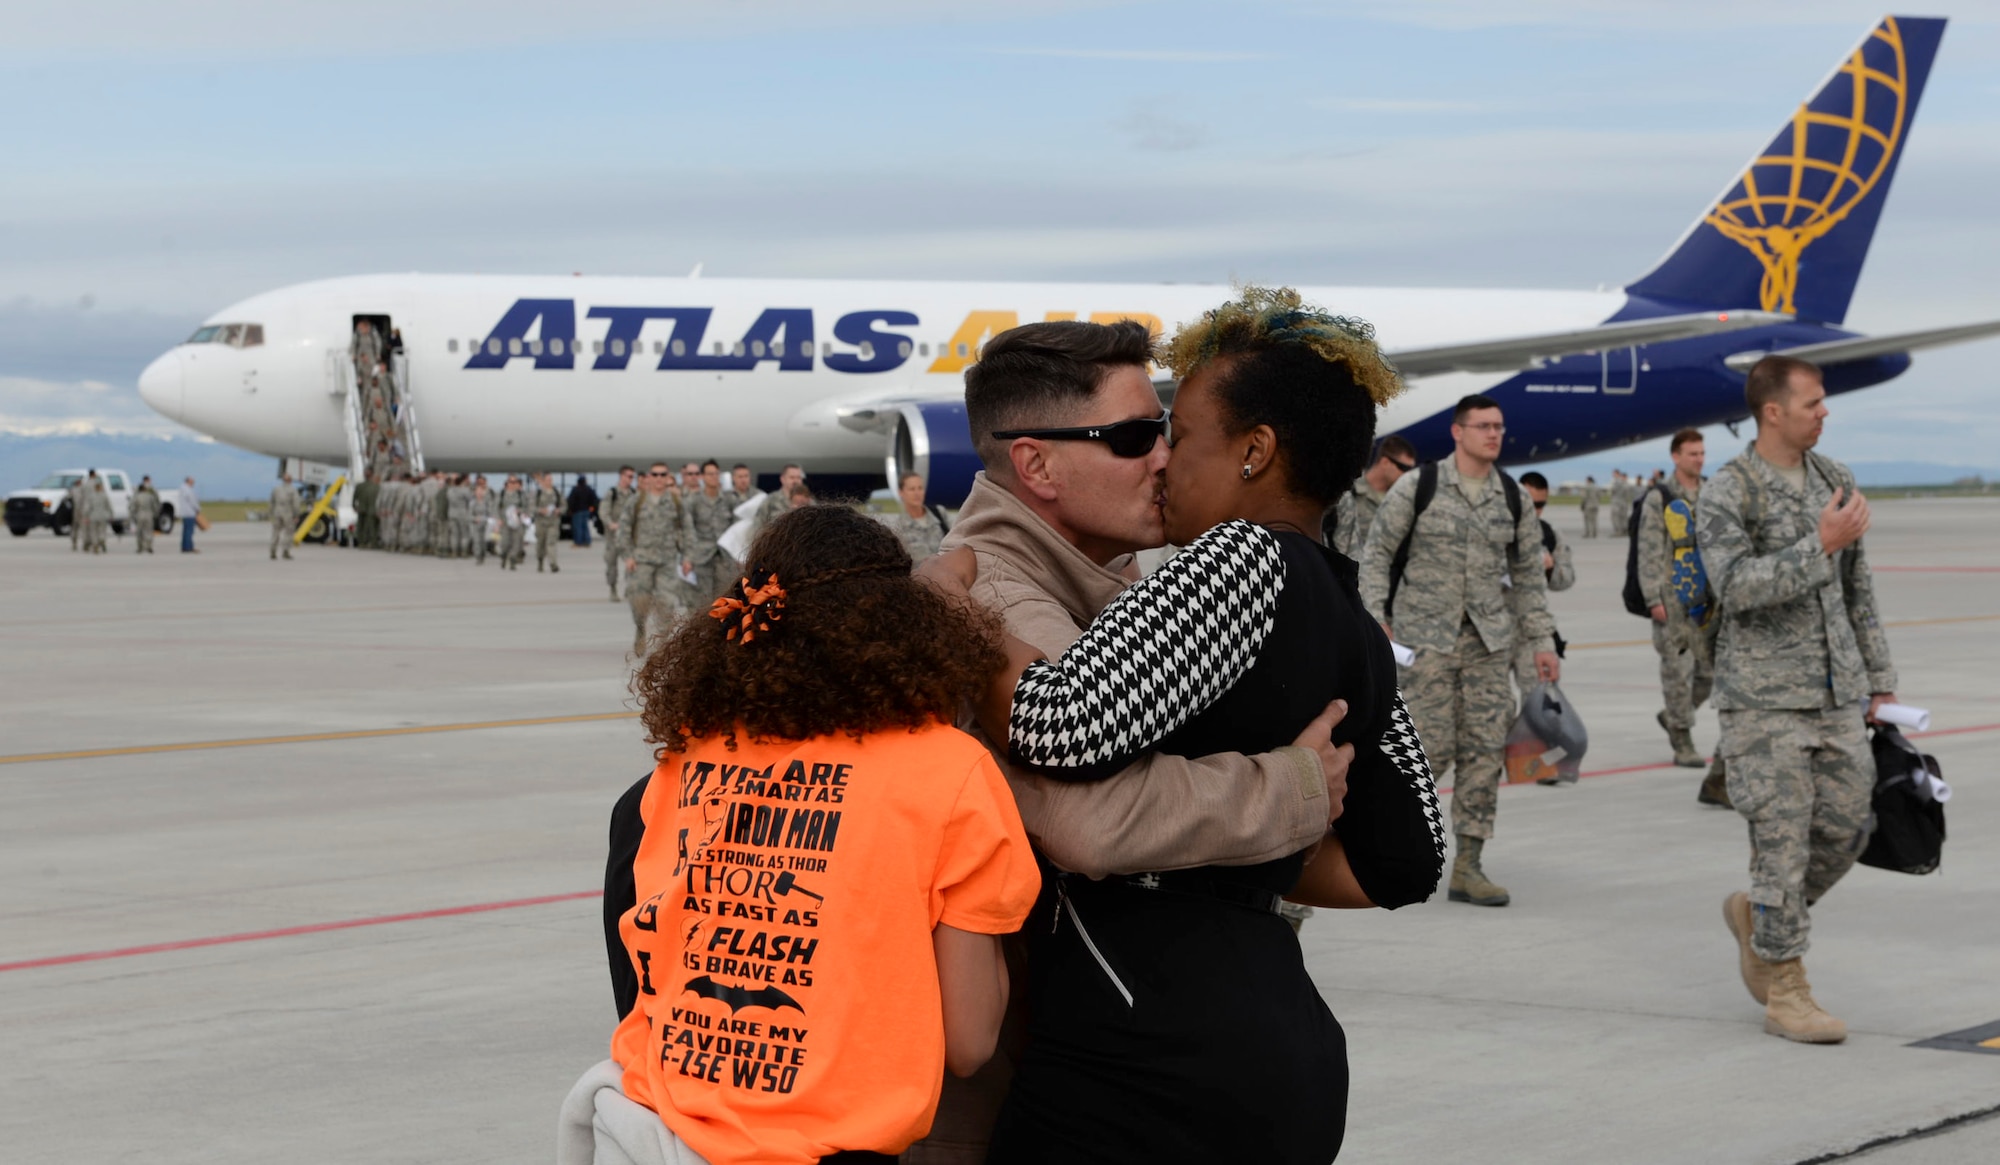 Families and loved ones welcome home airmen April 24, 2016, at Mountain Home Air Force Base, Idaho. The airmen returned from a six-month deployment to Southwest Asia in support of Operation Inherent Resolve. (U.S. Air Force photo by Airman 1st Class Chester Mientkiewicz/Released)